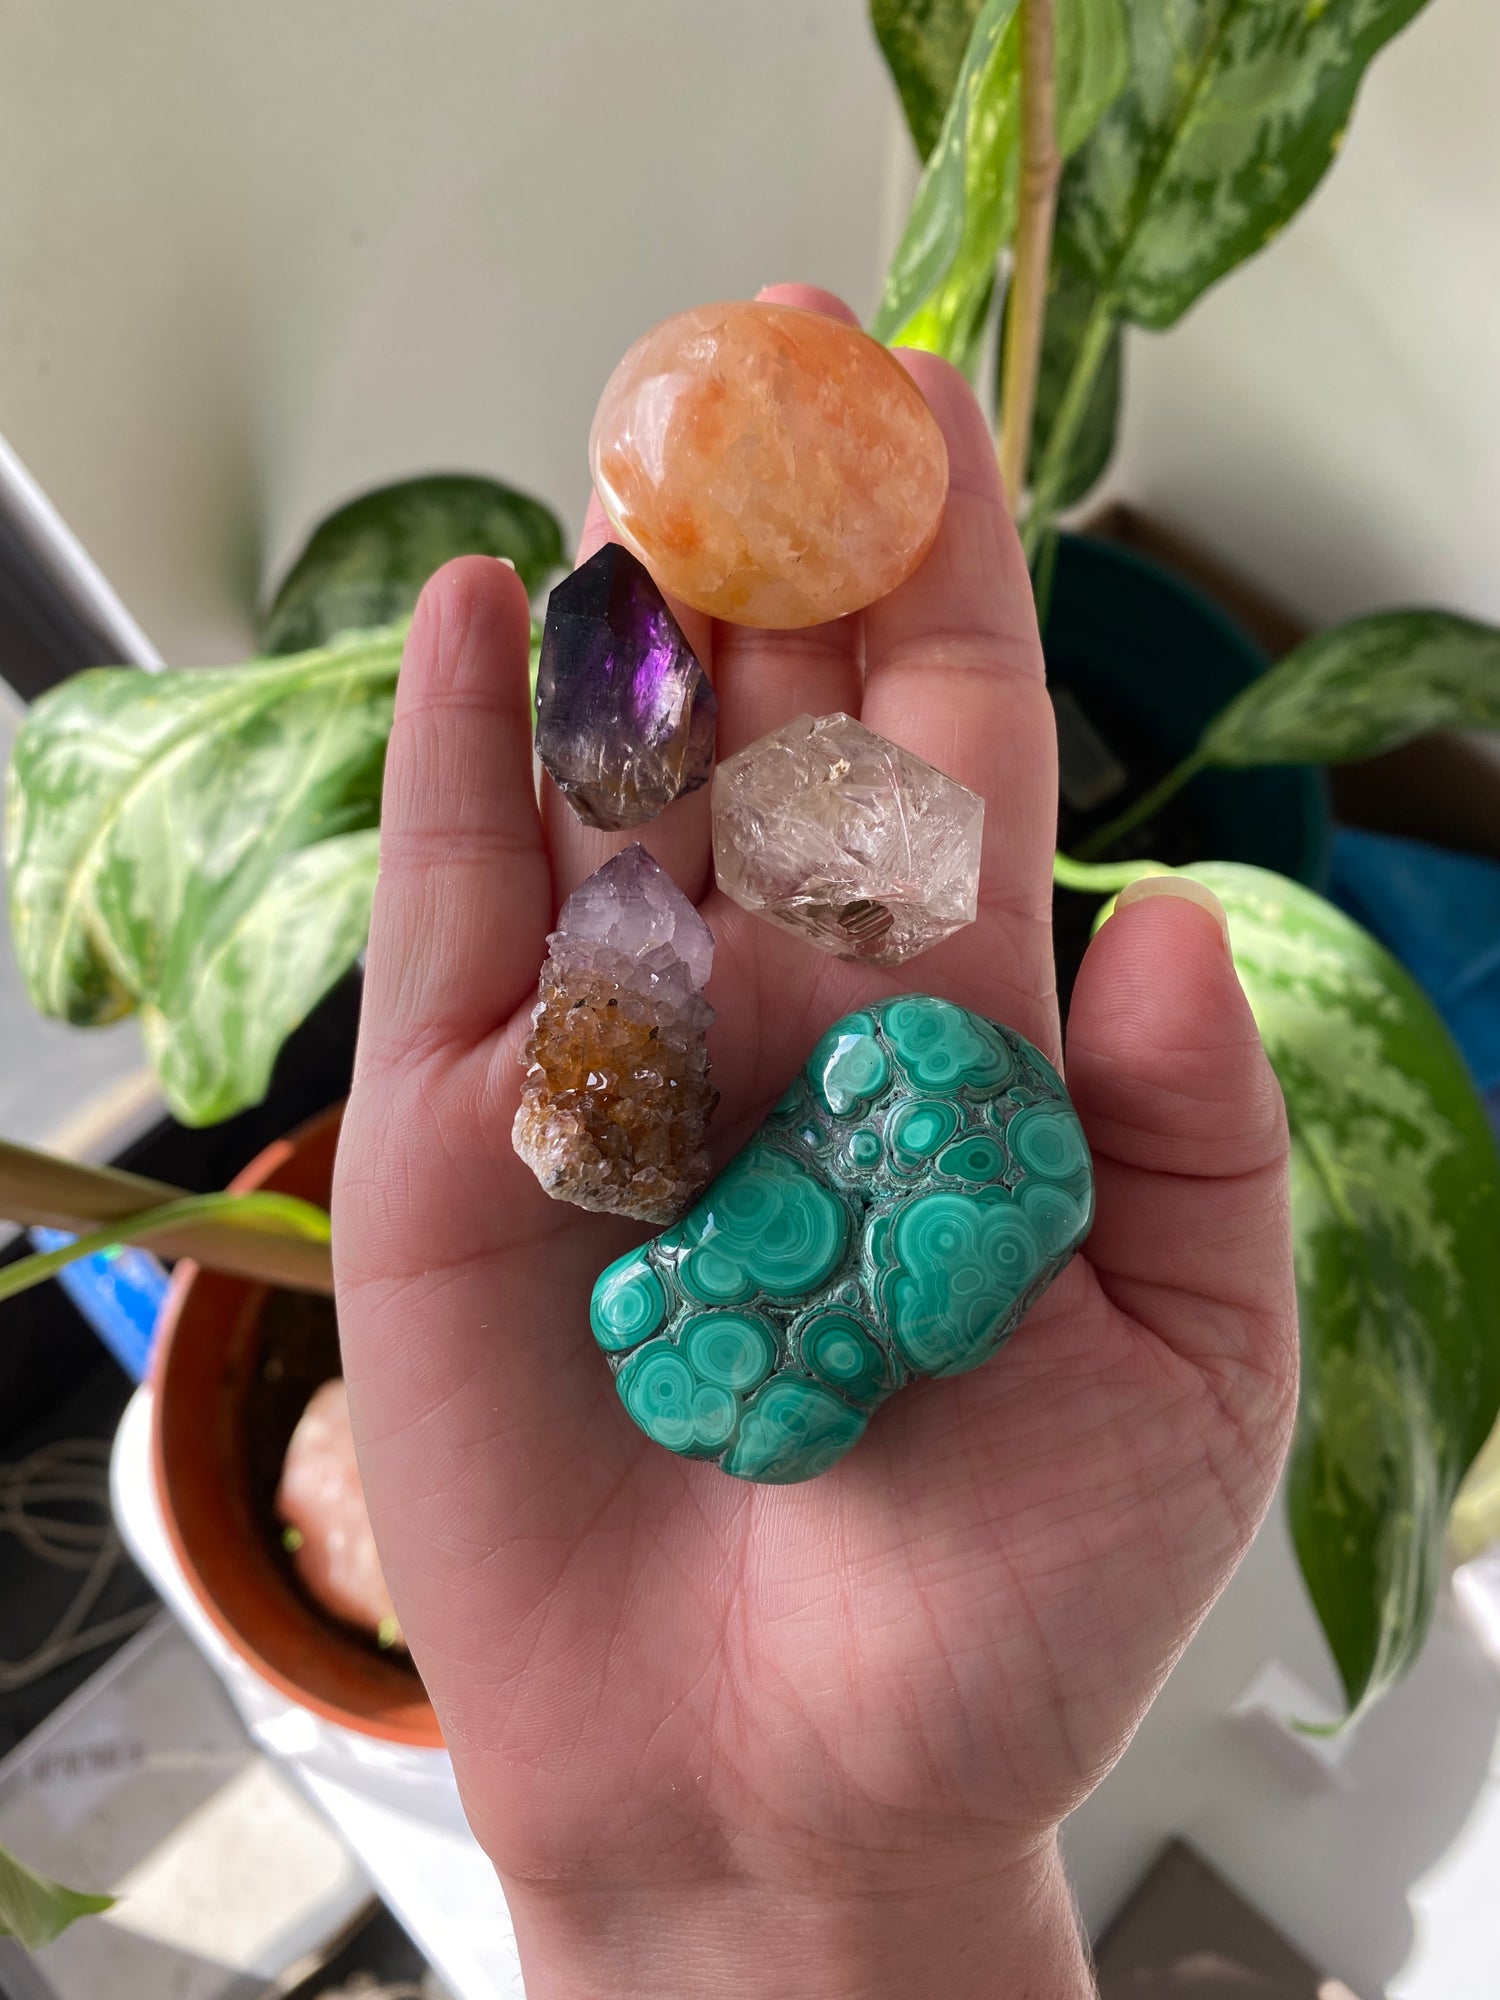 A handful of crystals hovering above green plants in an office. Green Malachite, Clear Quartz, Cactus Quartz, Shangaan Amethyst, Golden Healer.